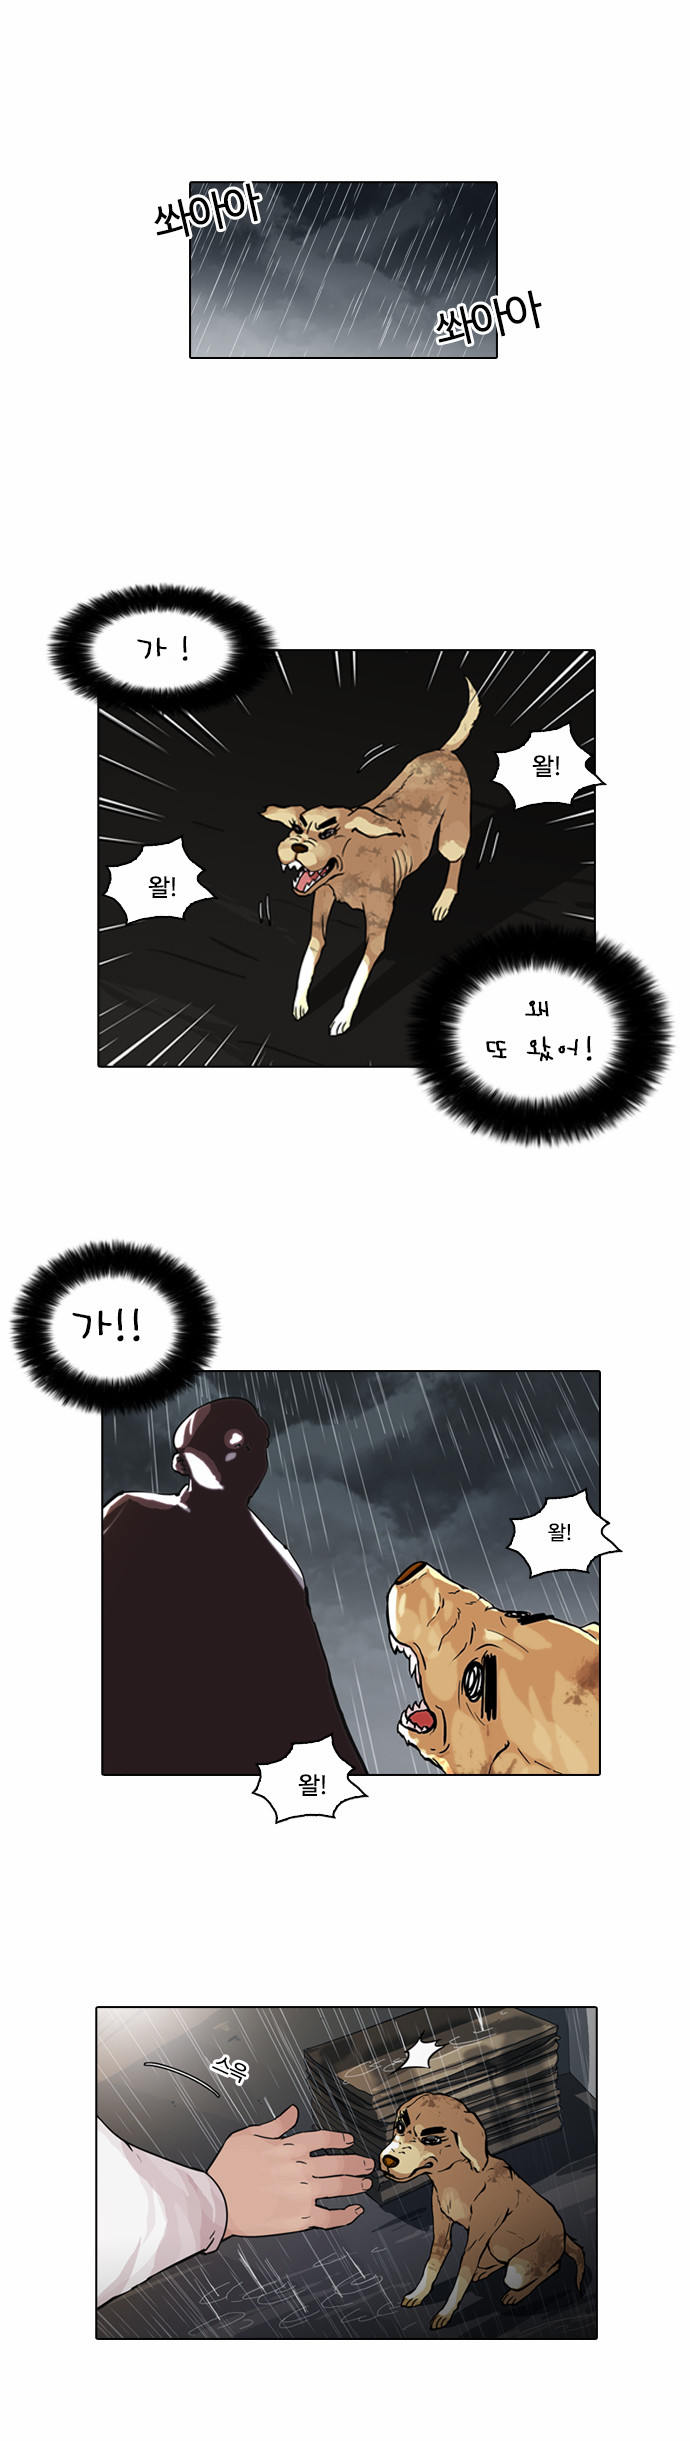 Lookism - Chapter 61 - Page 1